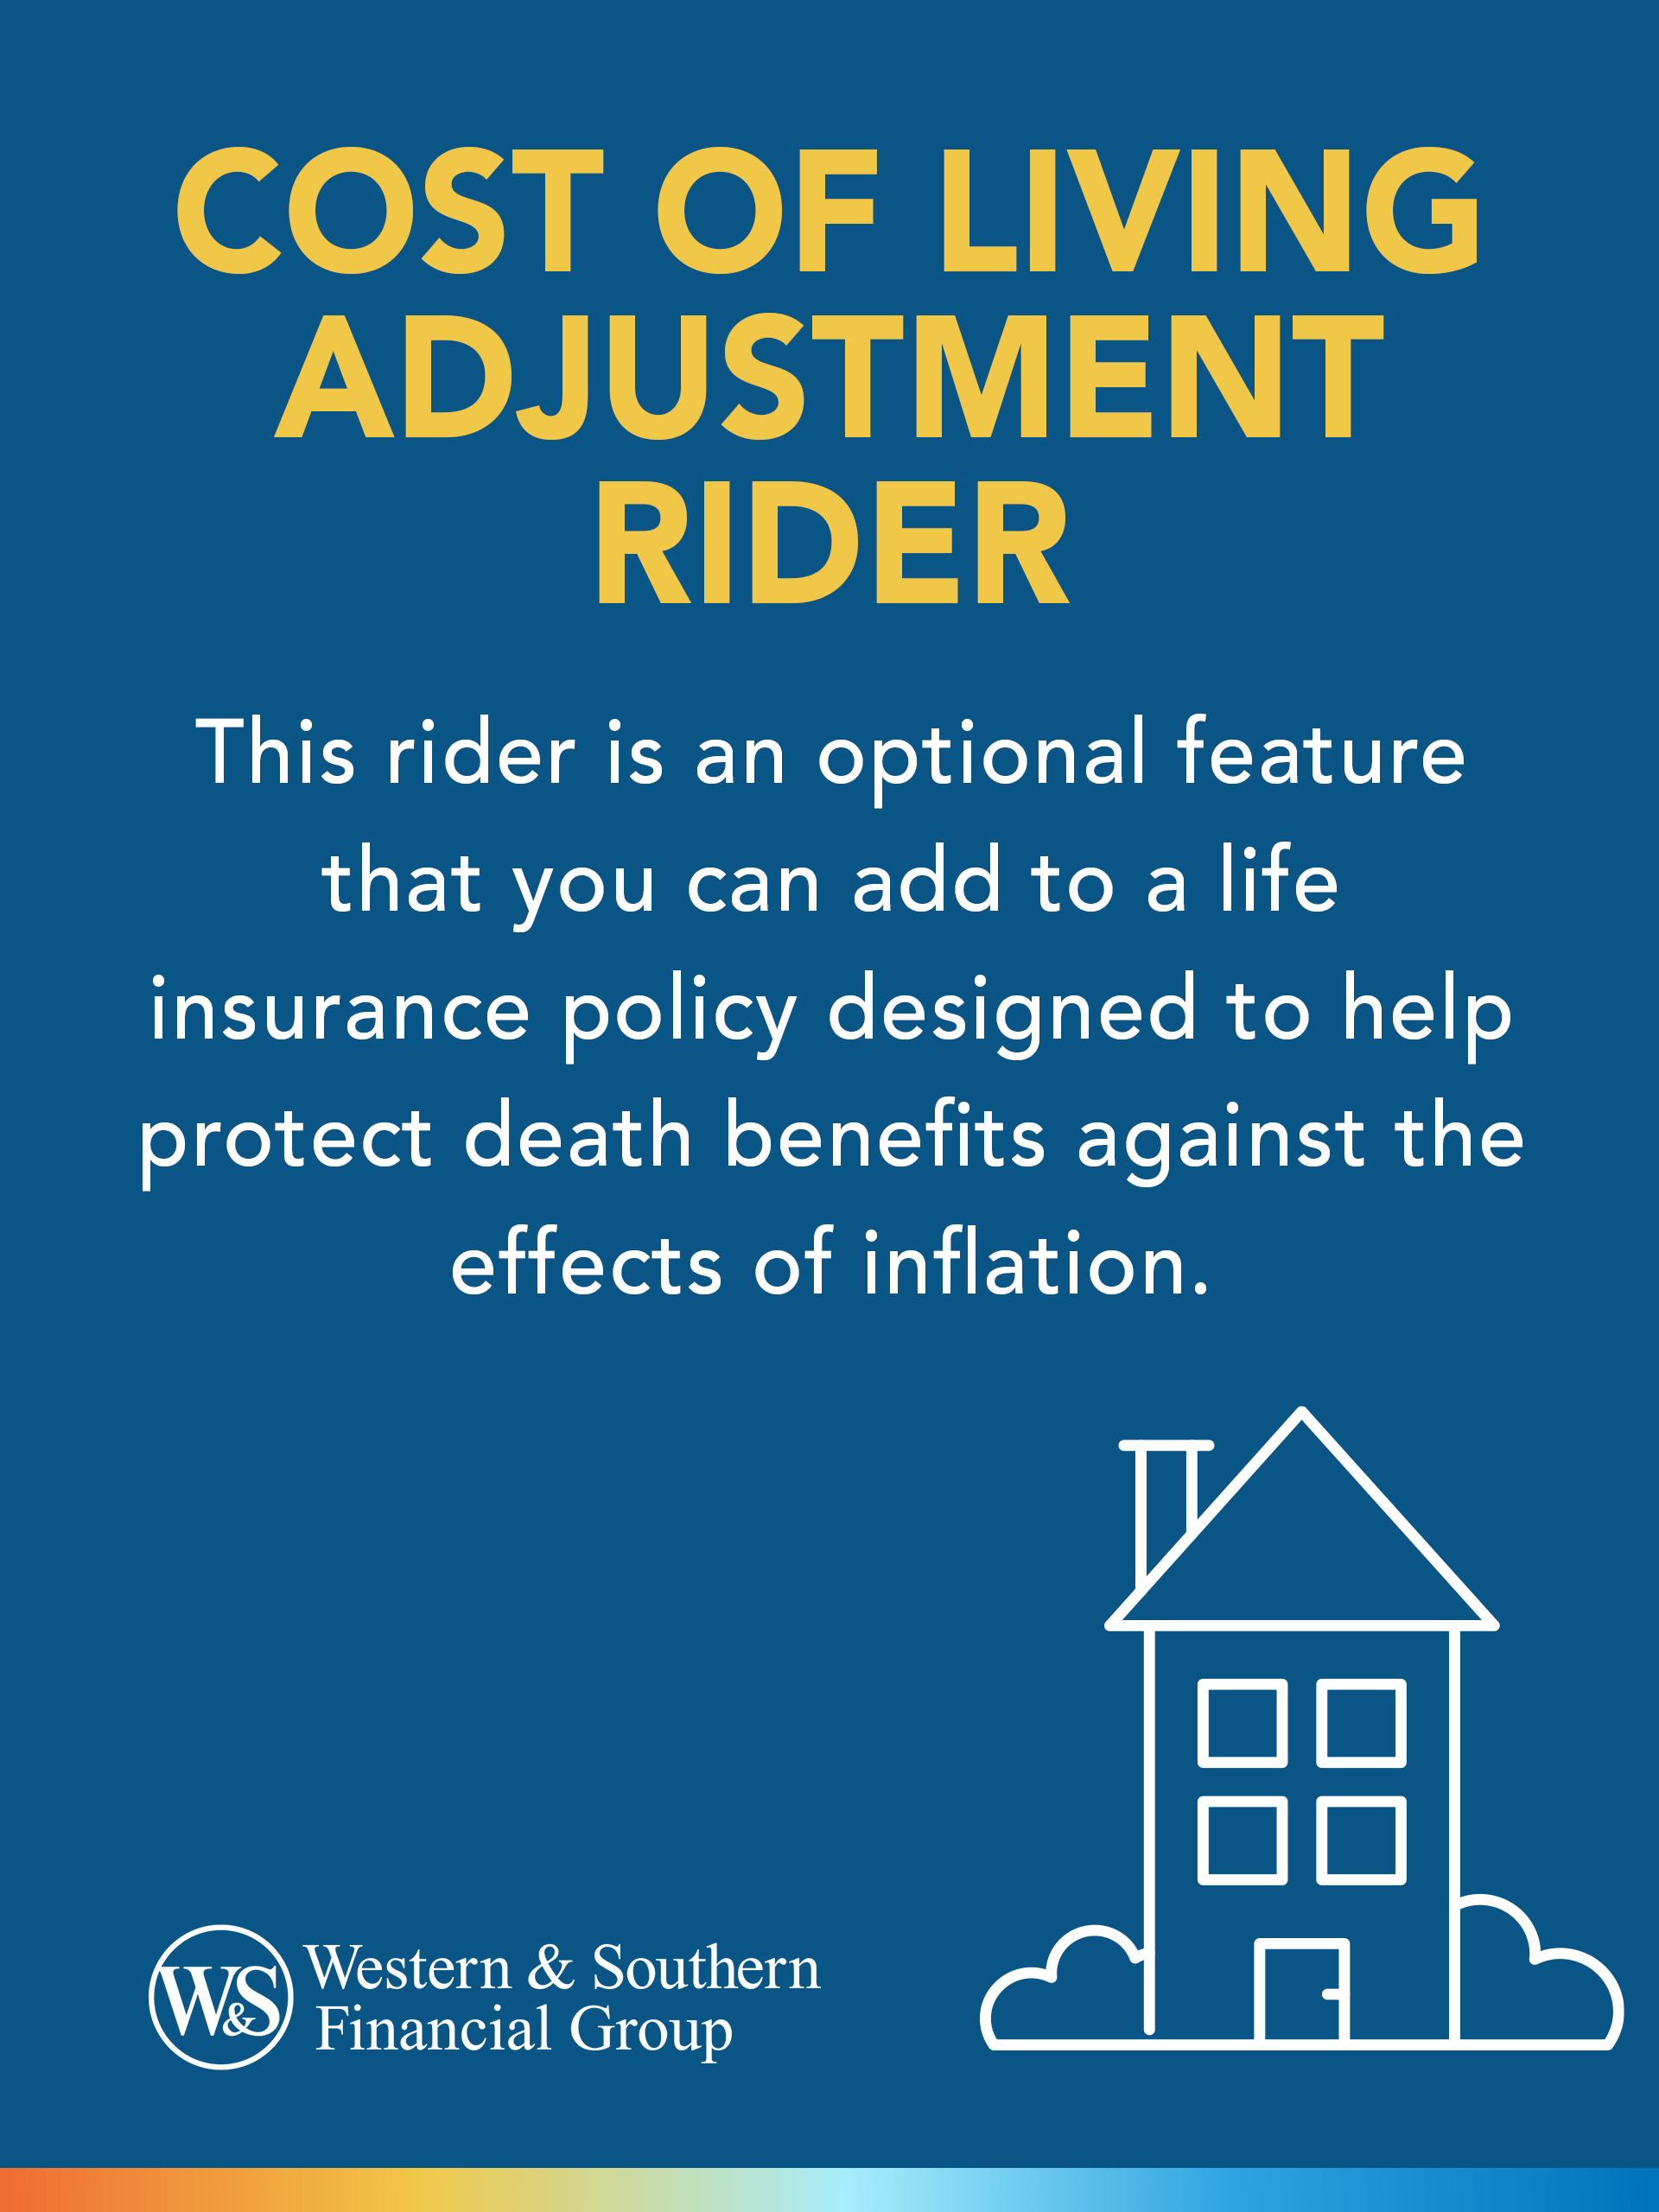 Cost of Living Adjustment Rider definition